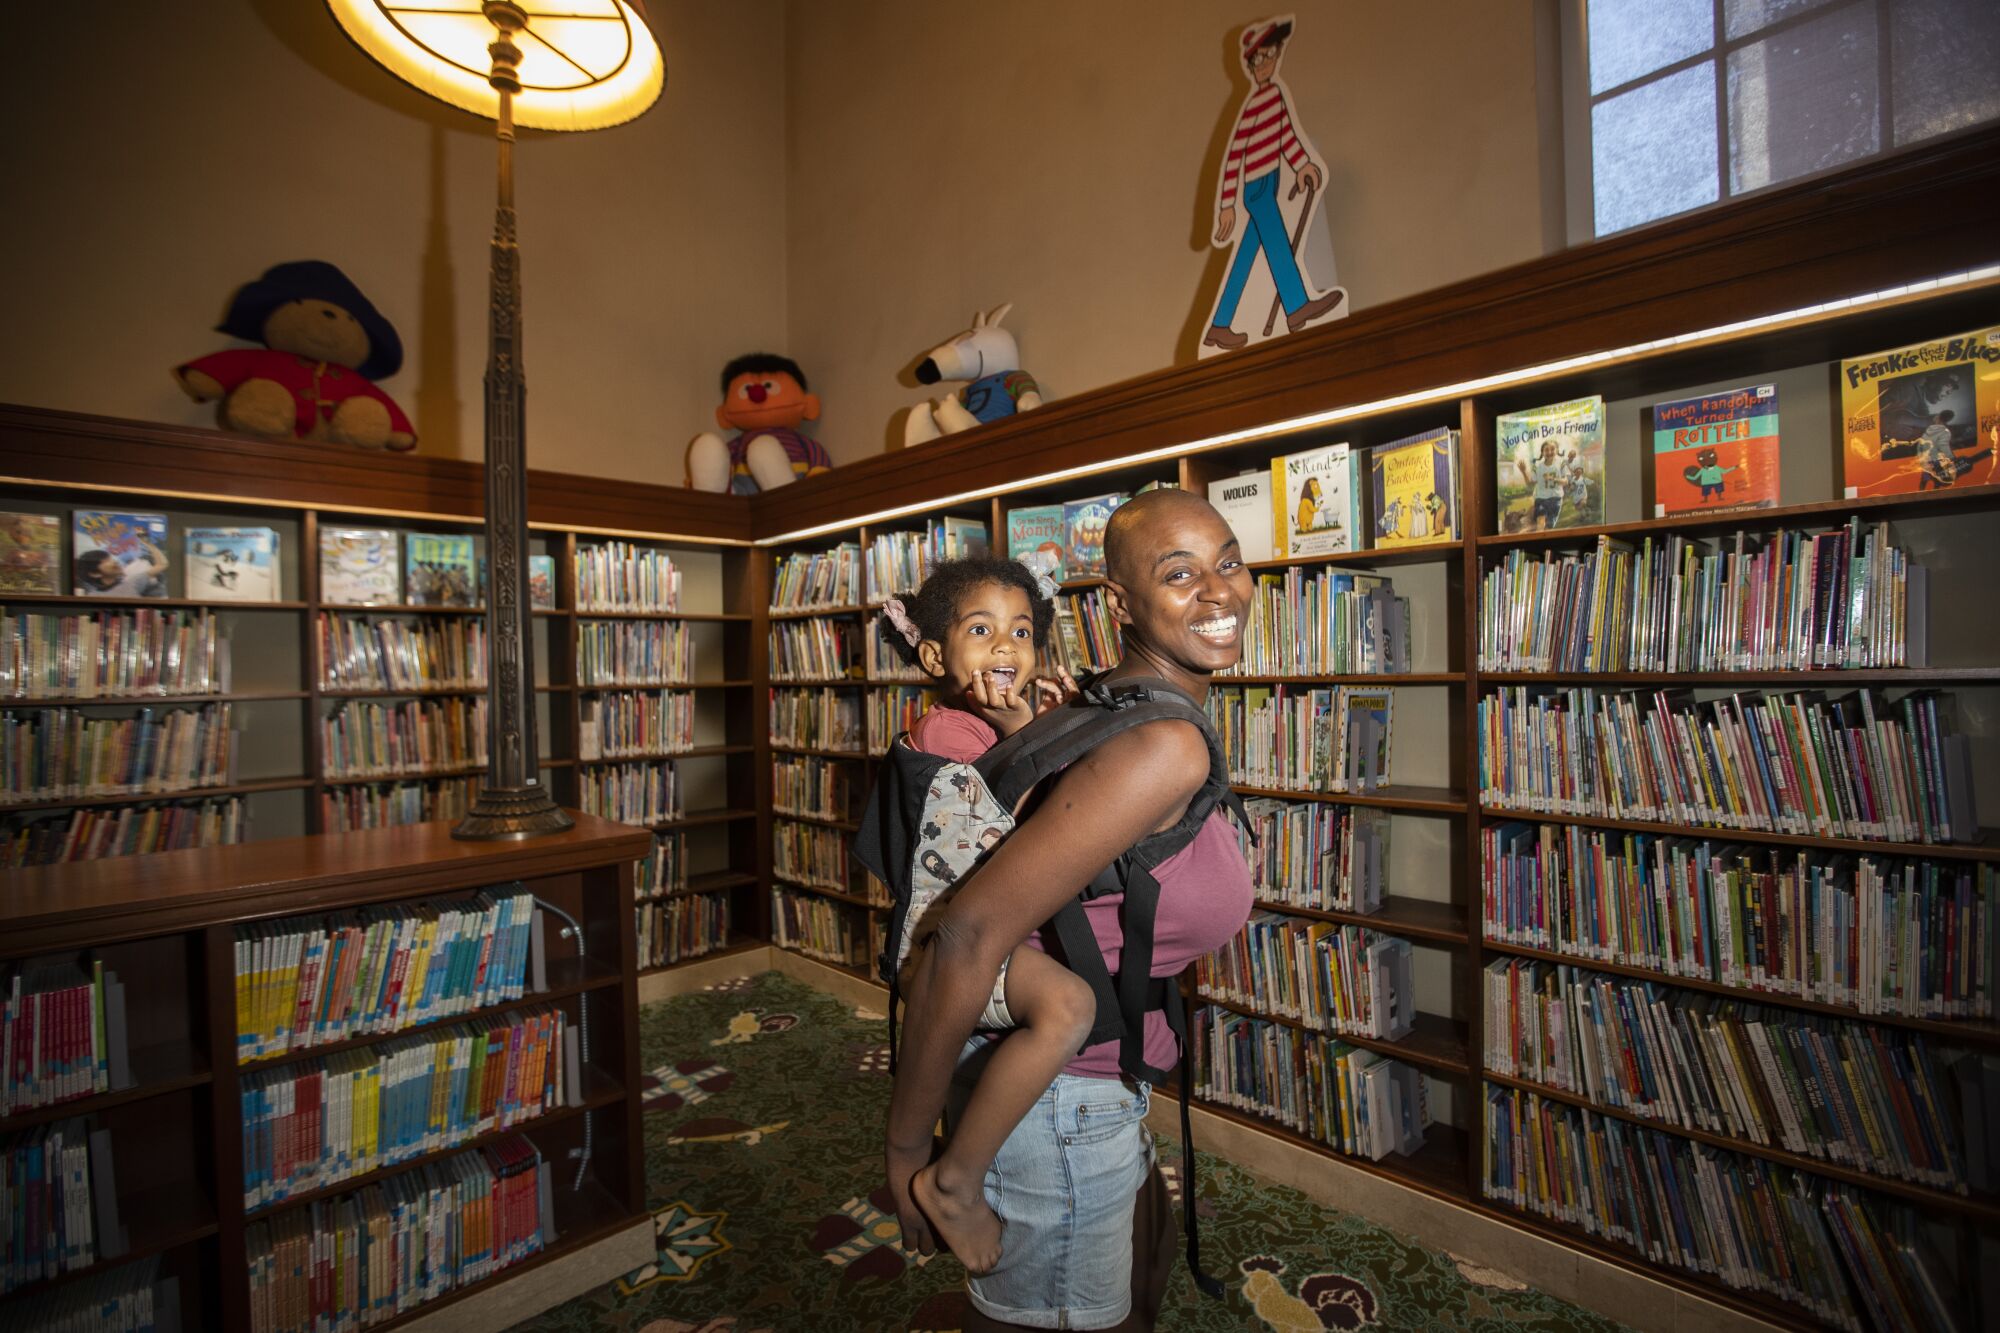 A woman carrying her daughter on her back amid walls of bookshelves.